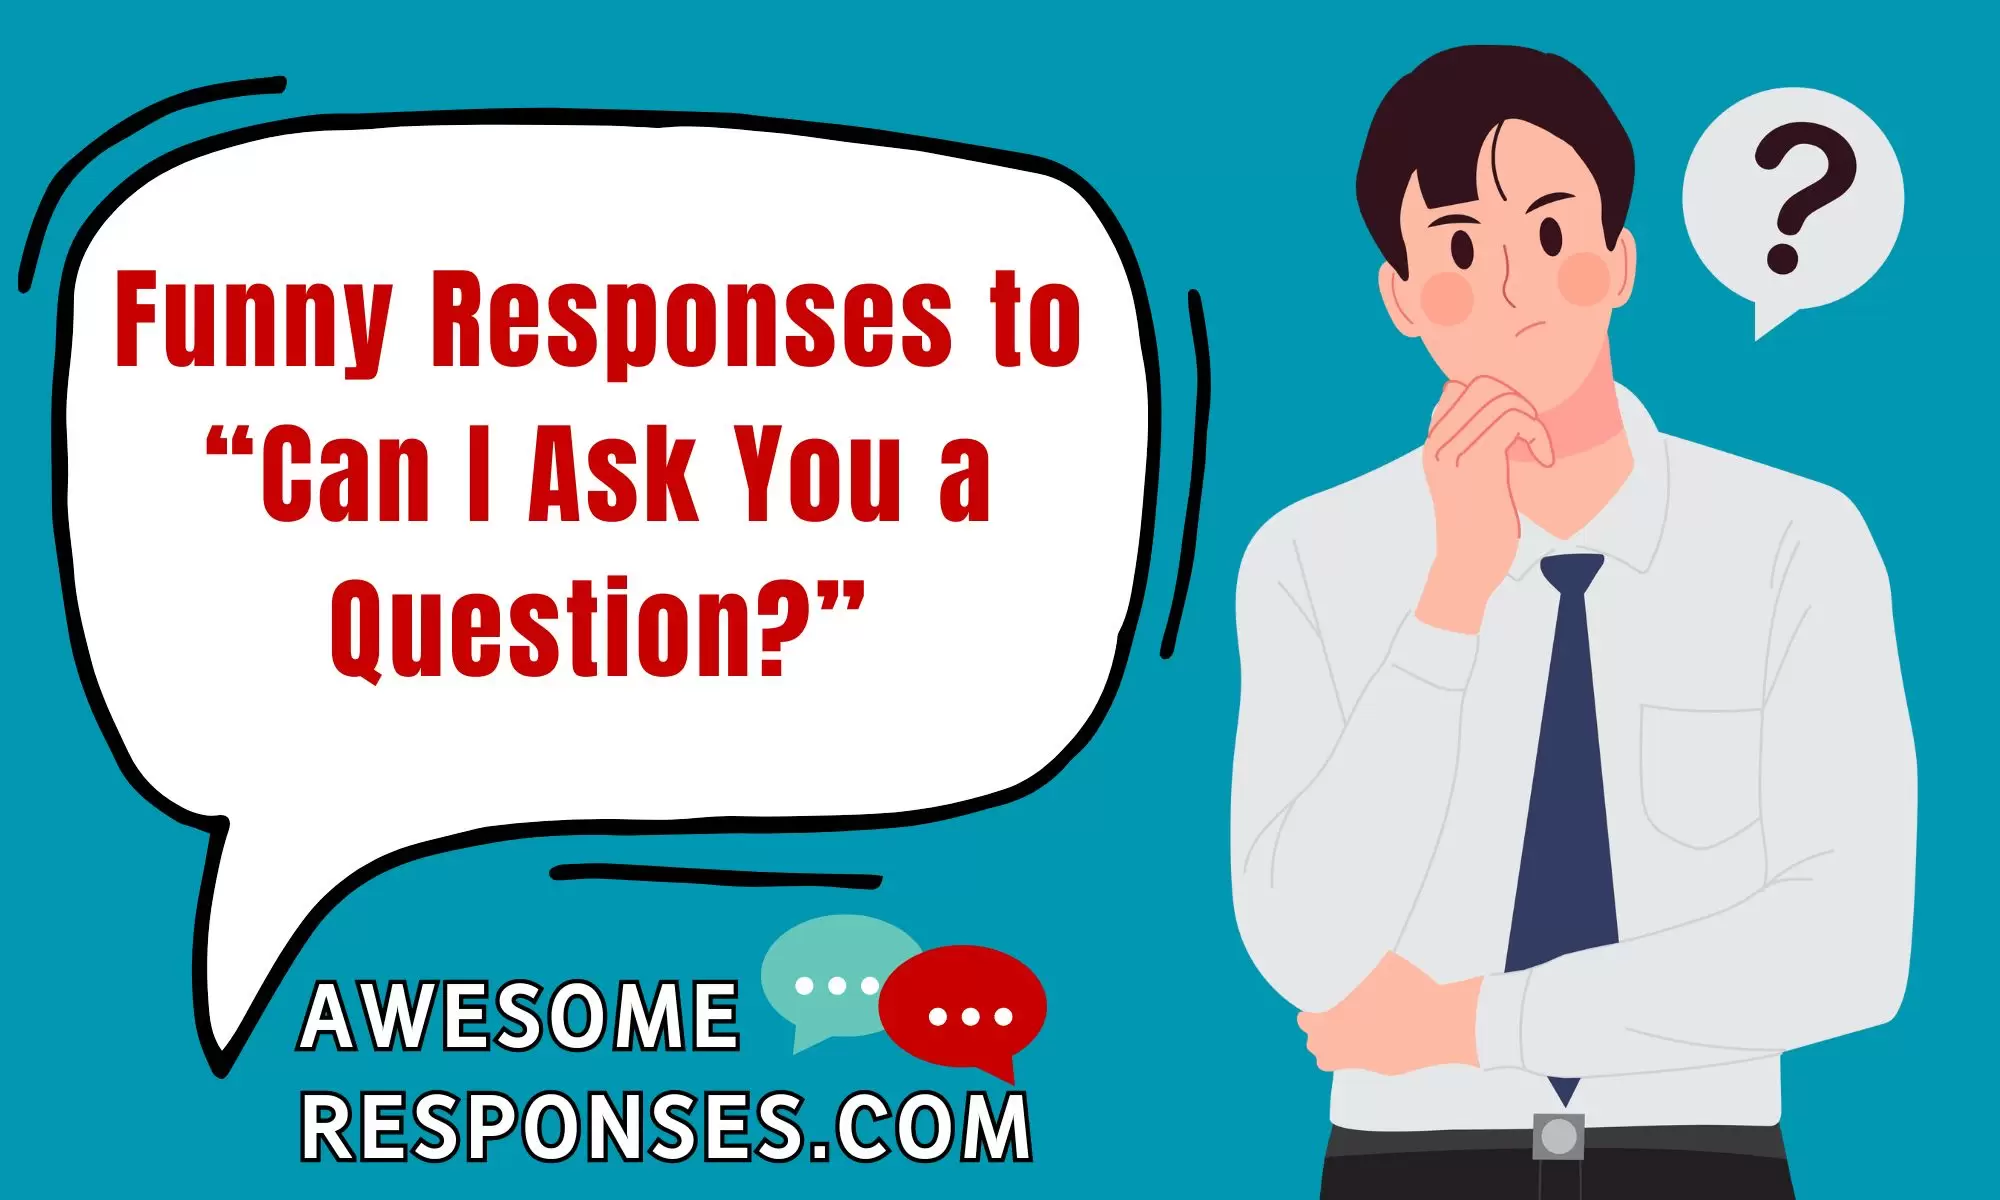 Funny Responses to “Can I Ask You a Question?”